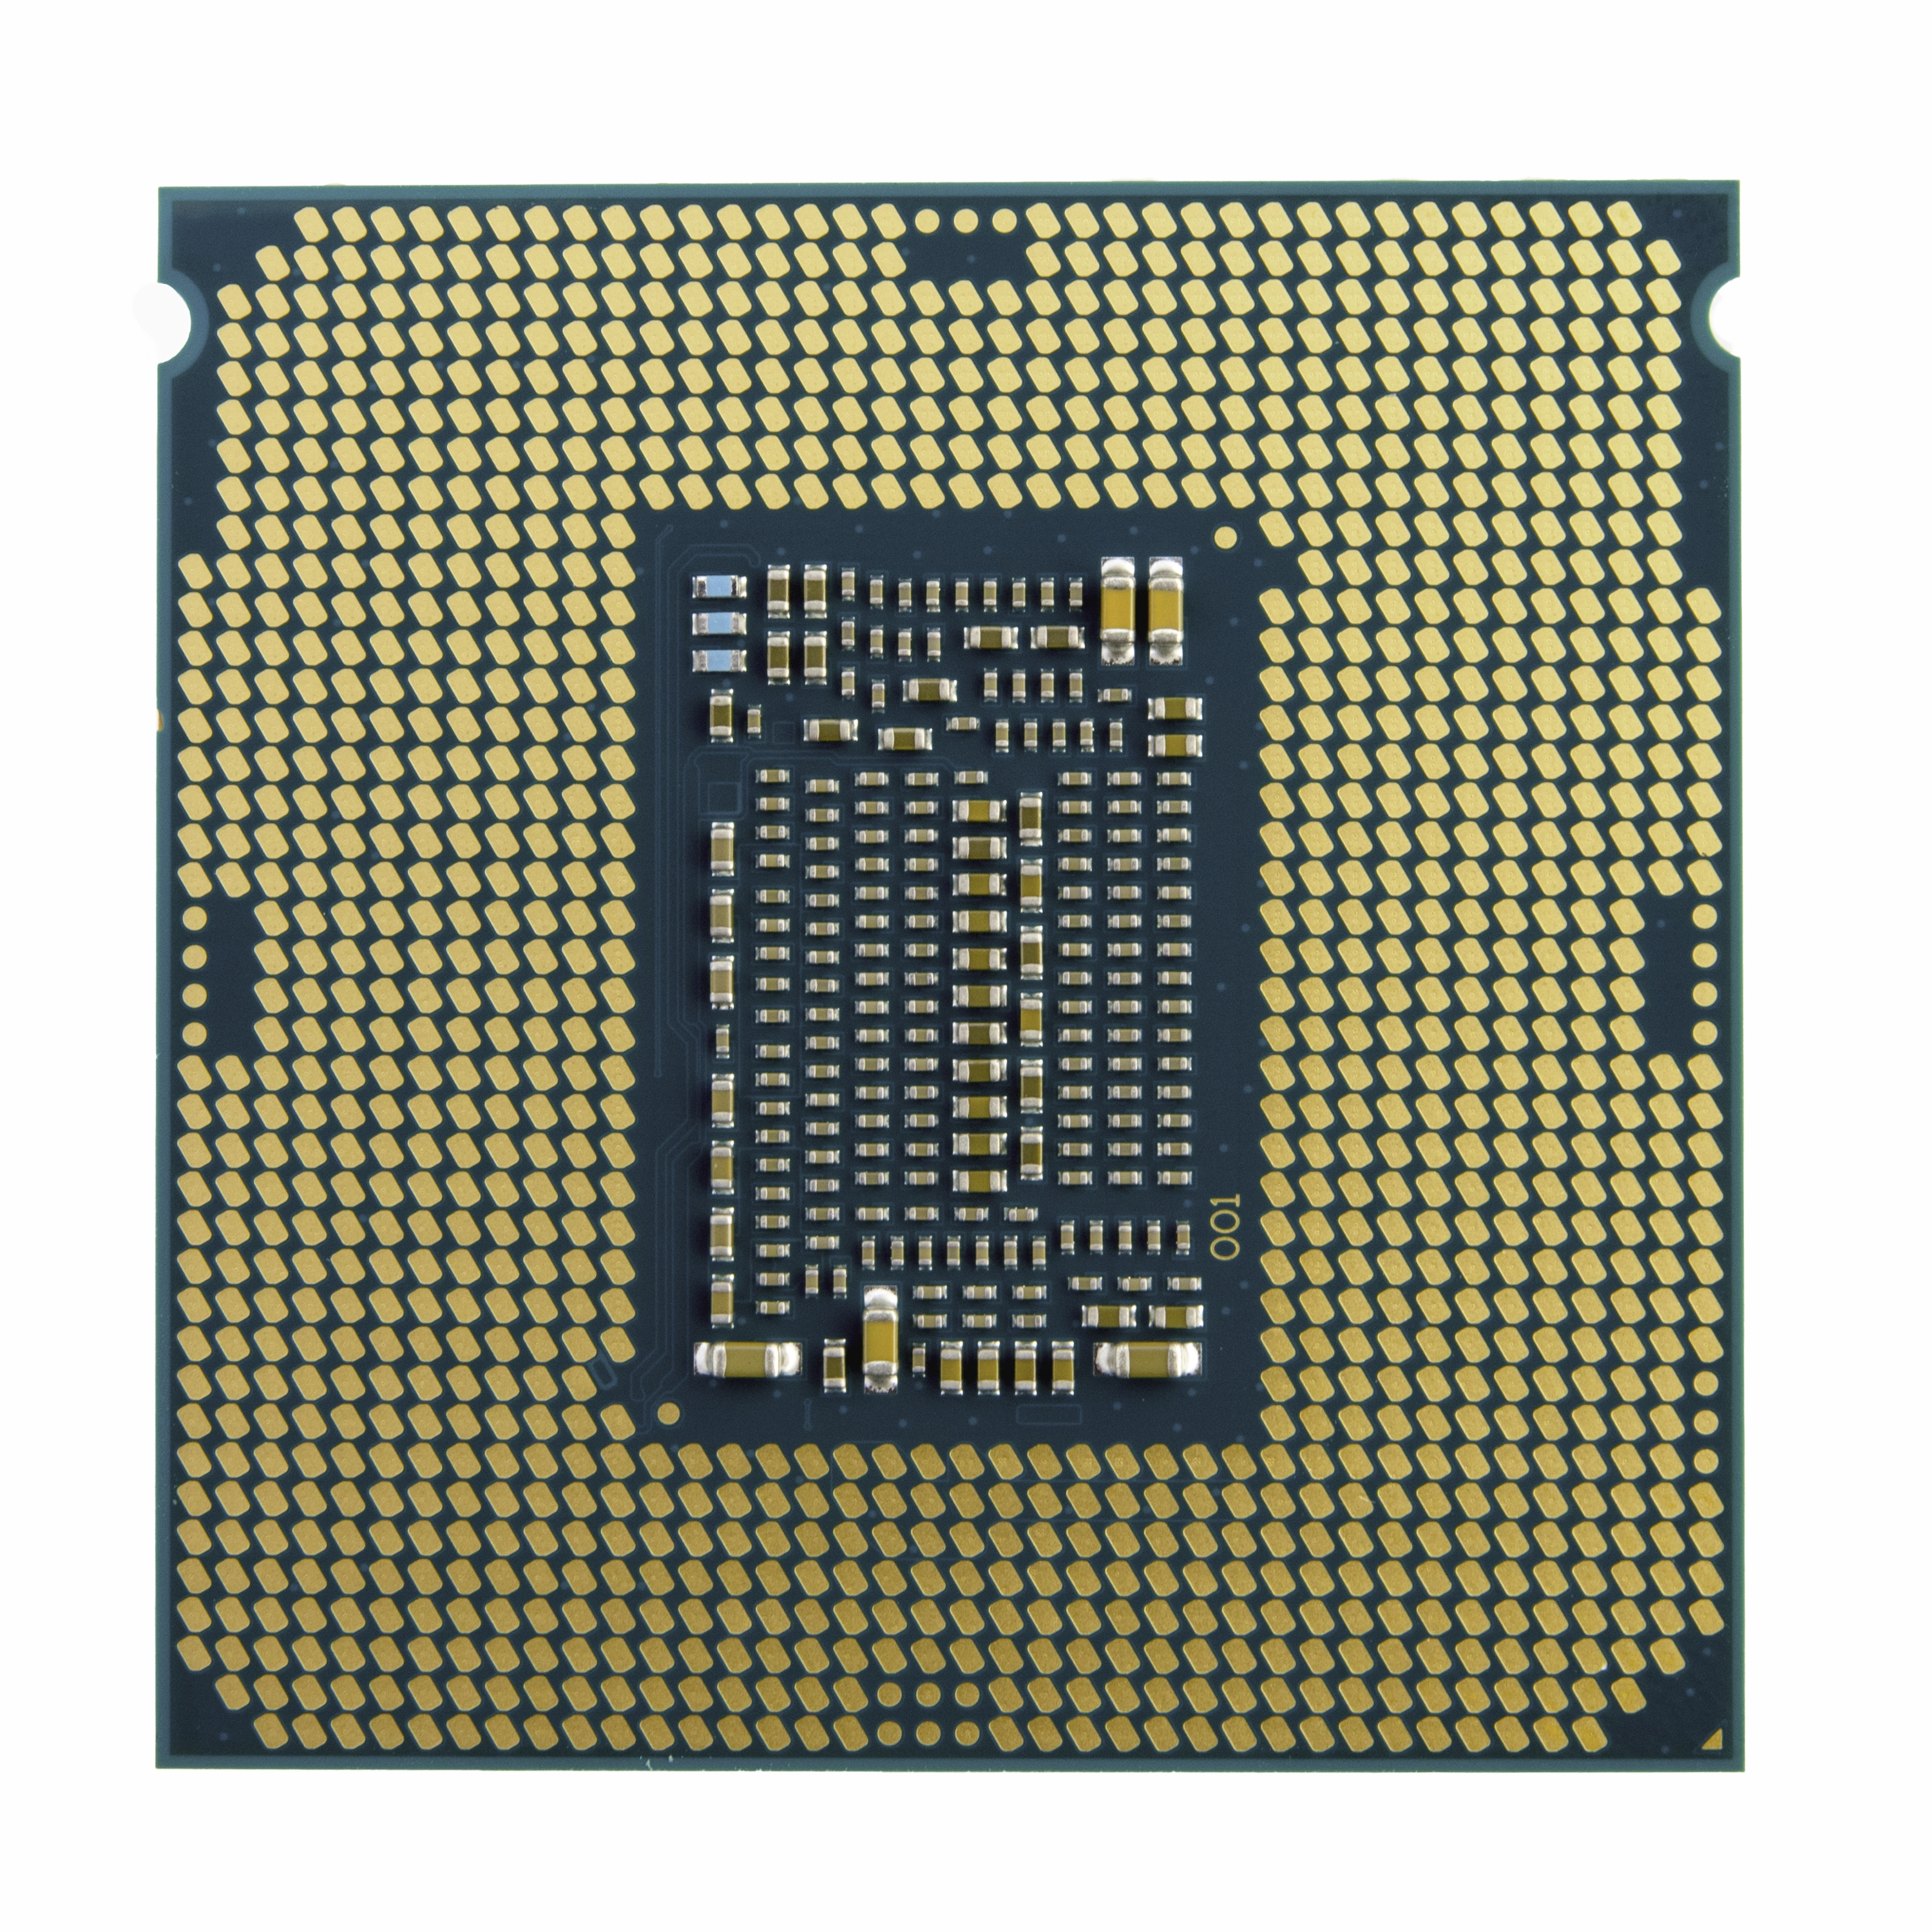 Intel Core i5-10600, 6C/12T, 3,3/4,8 GHz, 12 MB, 65 W, S1200, UHD Graphics 630, 350/1200 Boxed